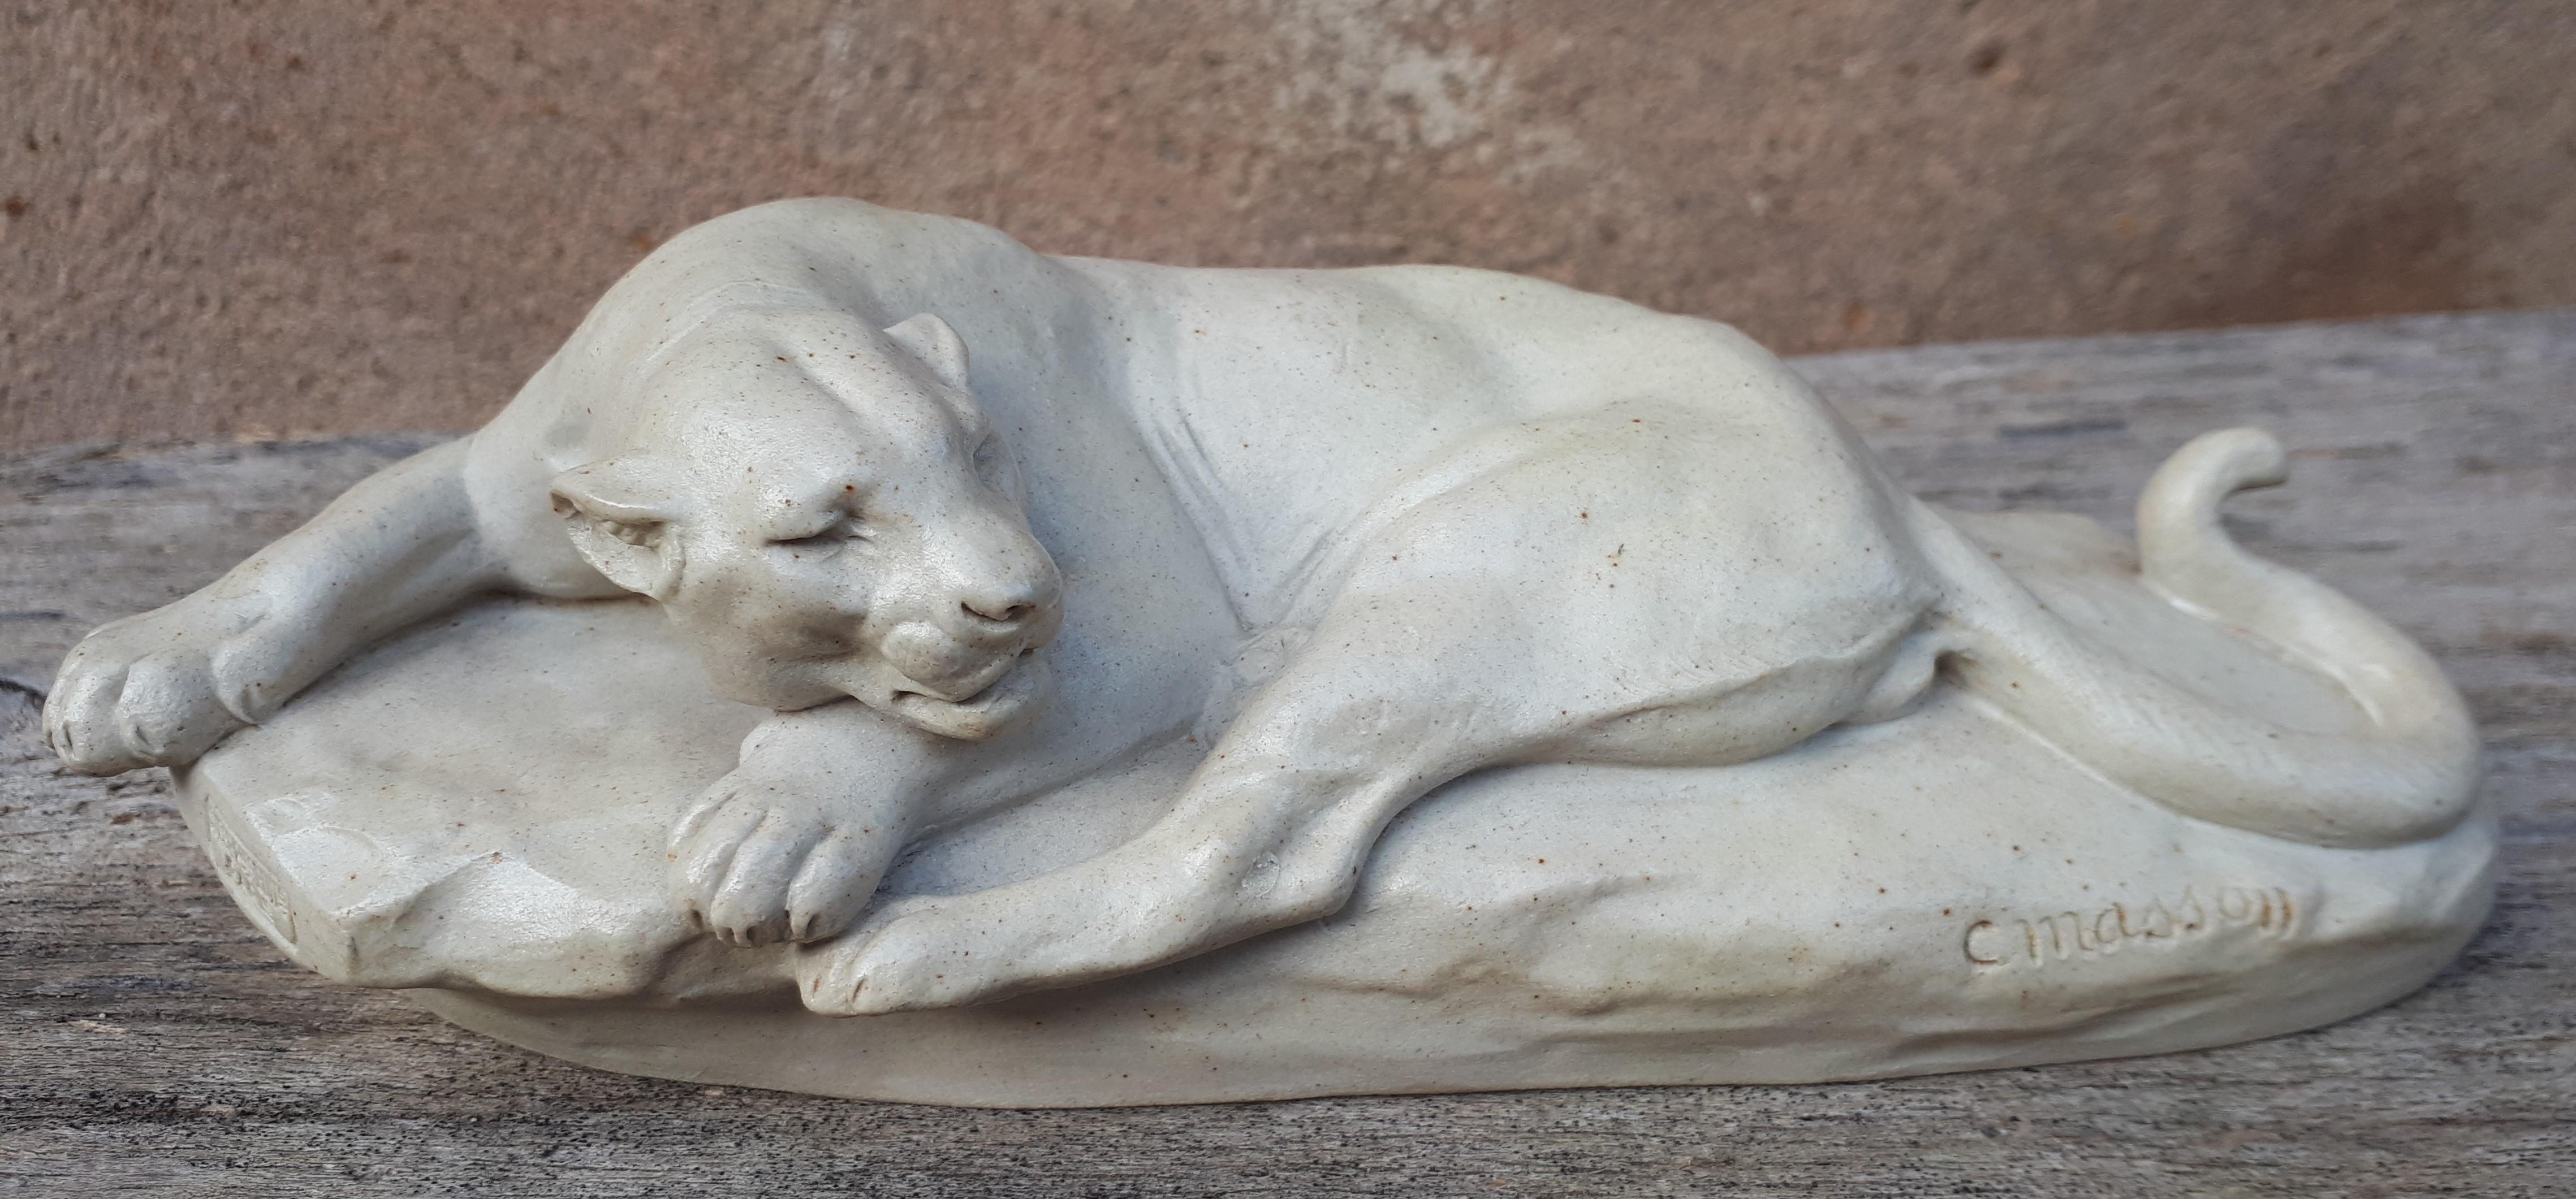 Superb enameled sandstone animal sculpture representing a lioness lying on a rock.
Bears the artist's signature 